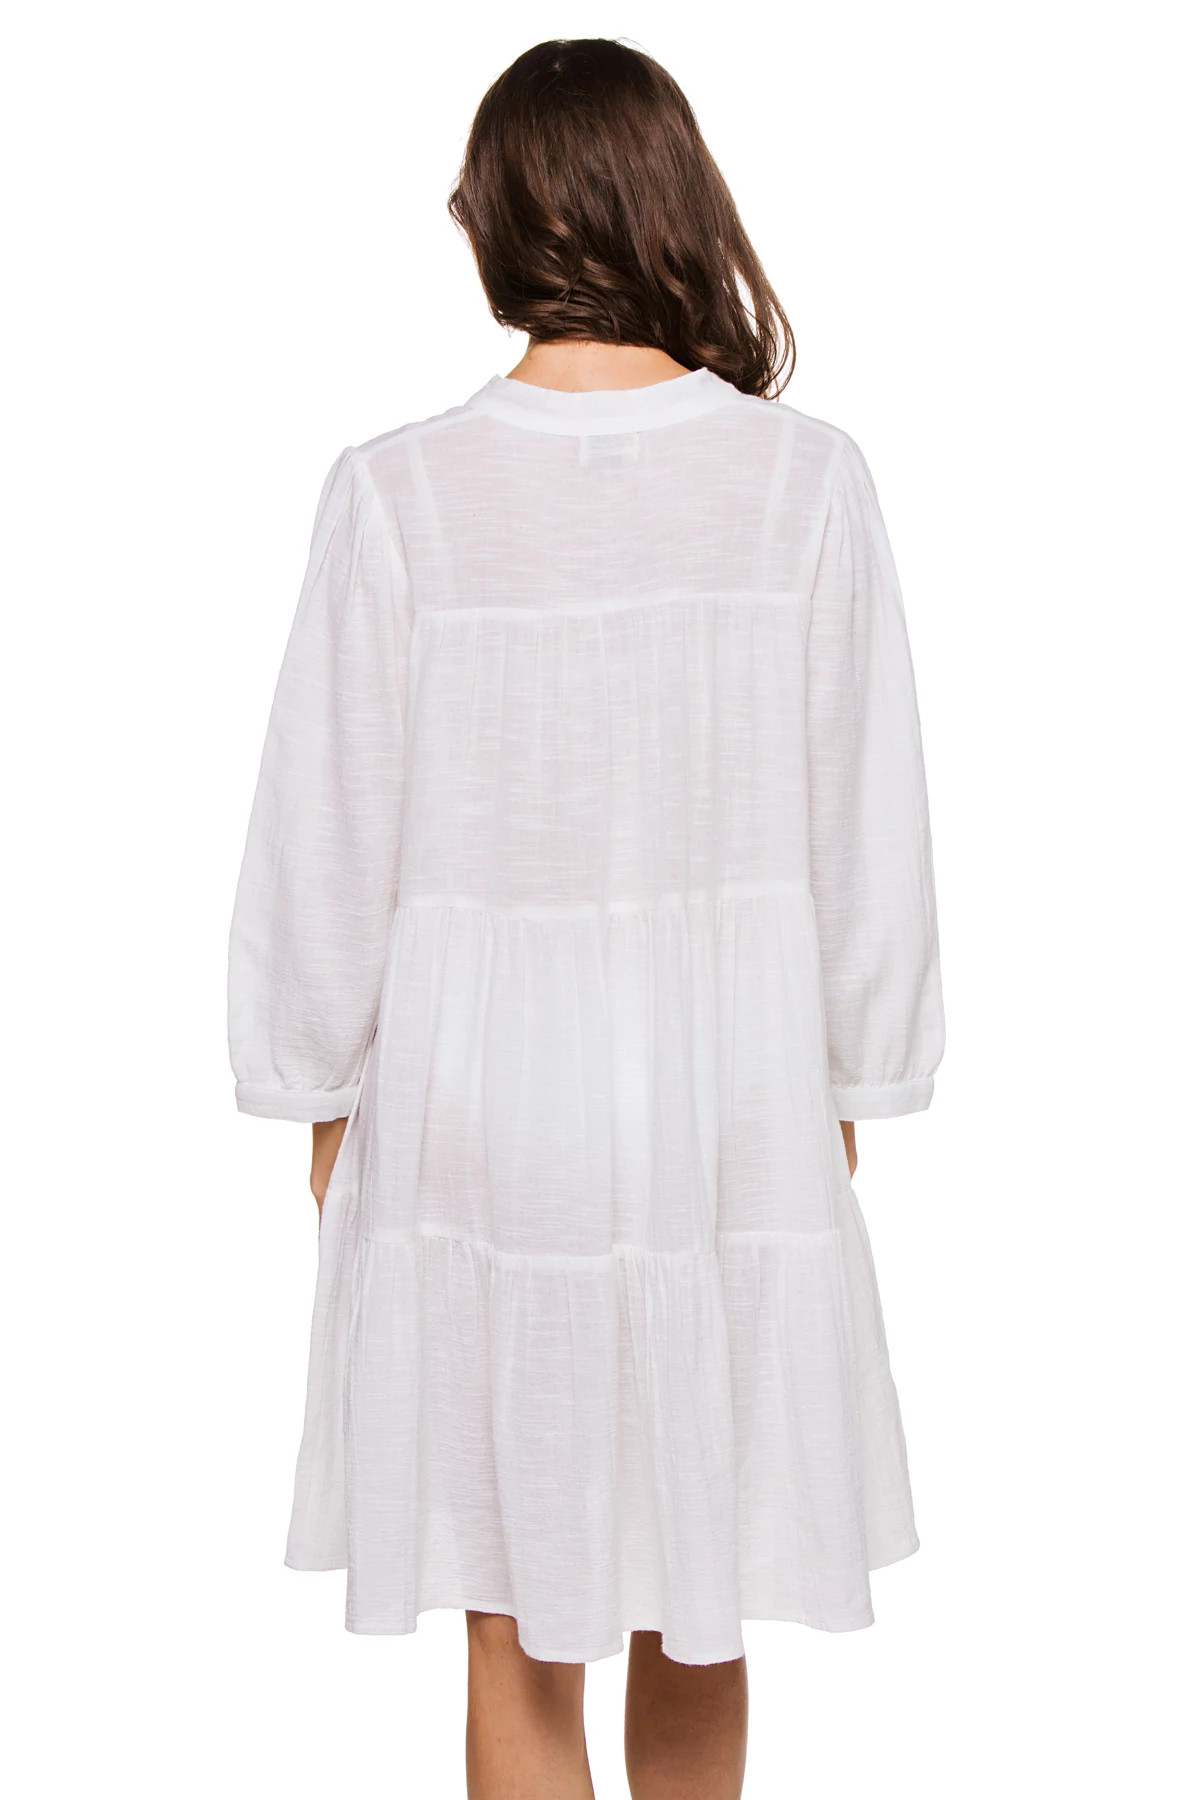 WHITE Button Front Dress image number 2